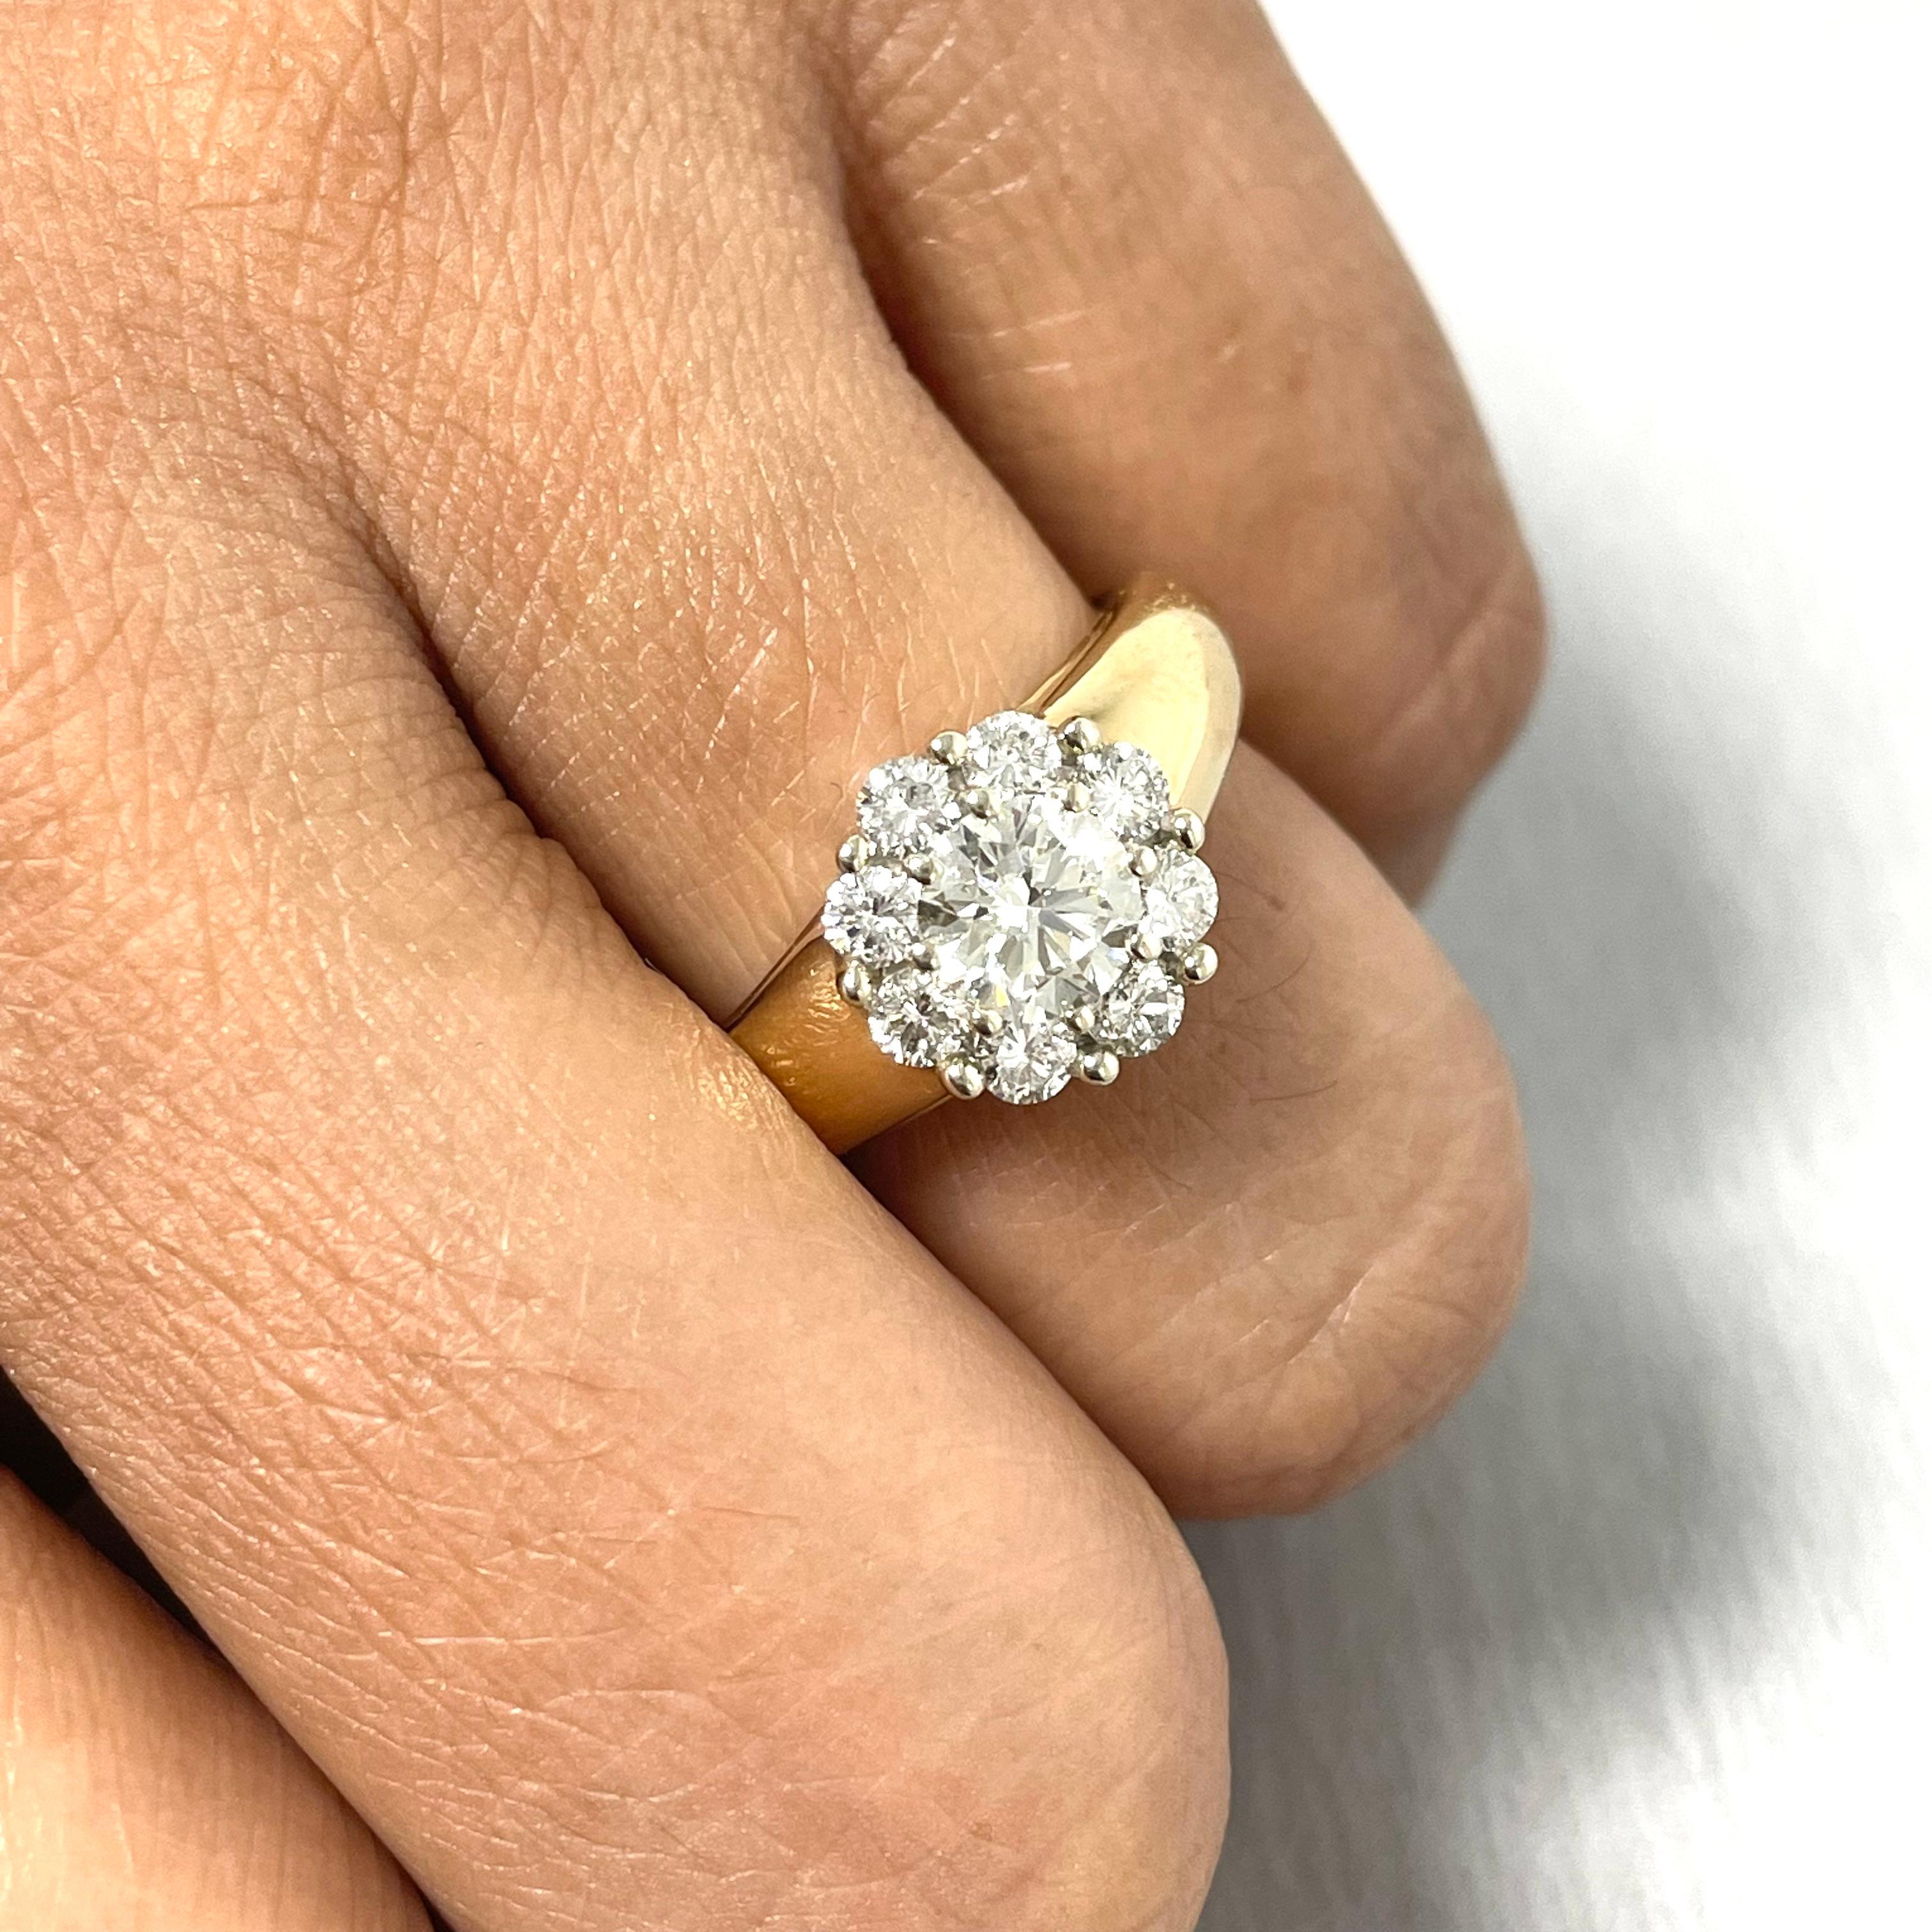 Uniquely chunky and full of life, the Flora is a statement bubble engagement ring that stands on its own. It is perfect for someone whose style is to break the norm.

Center Diamond Shape: Round Brilliant 
Center Diamond Weight: 0.75 ct 
Diamond